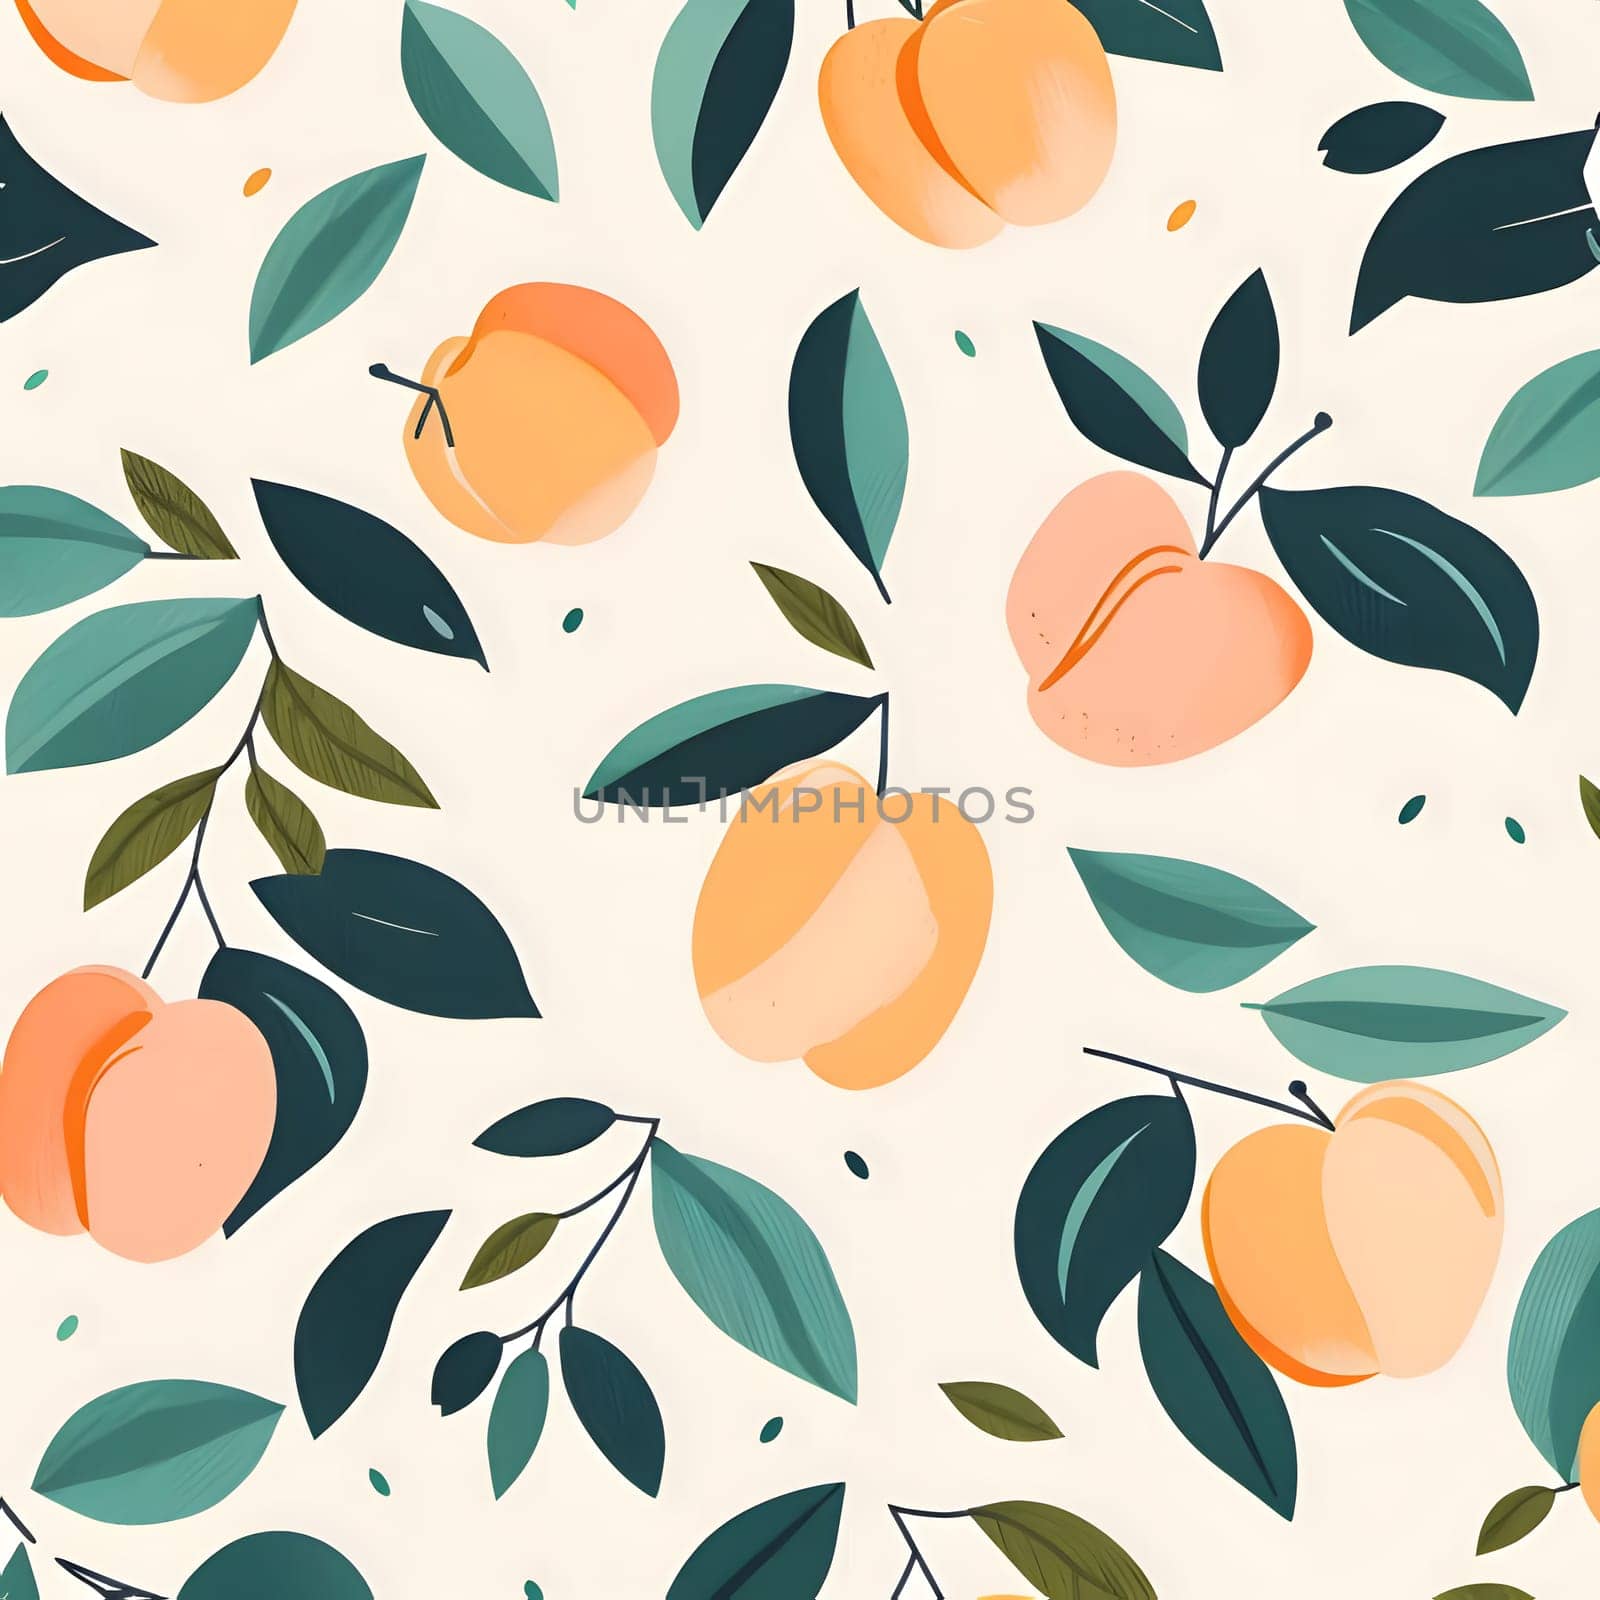 Patterns and banners backgrounds: Seamless pattern with apricots and leaves. Vector illustration.